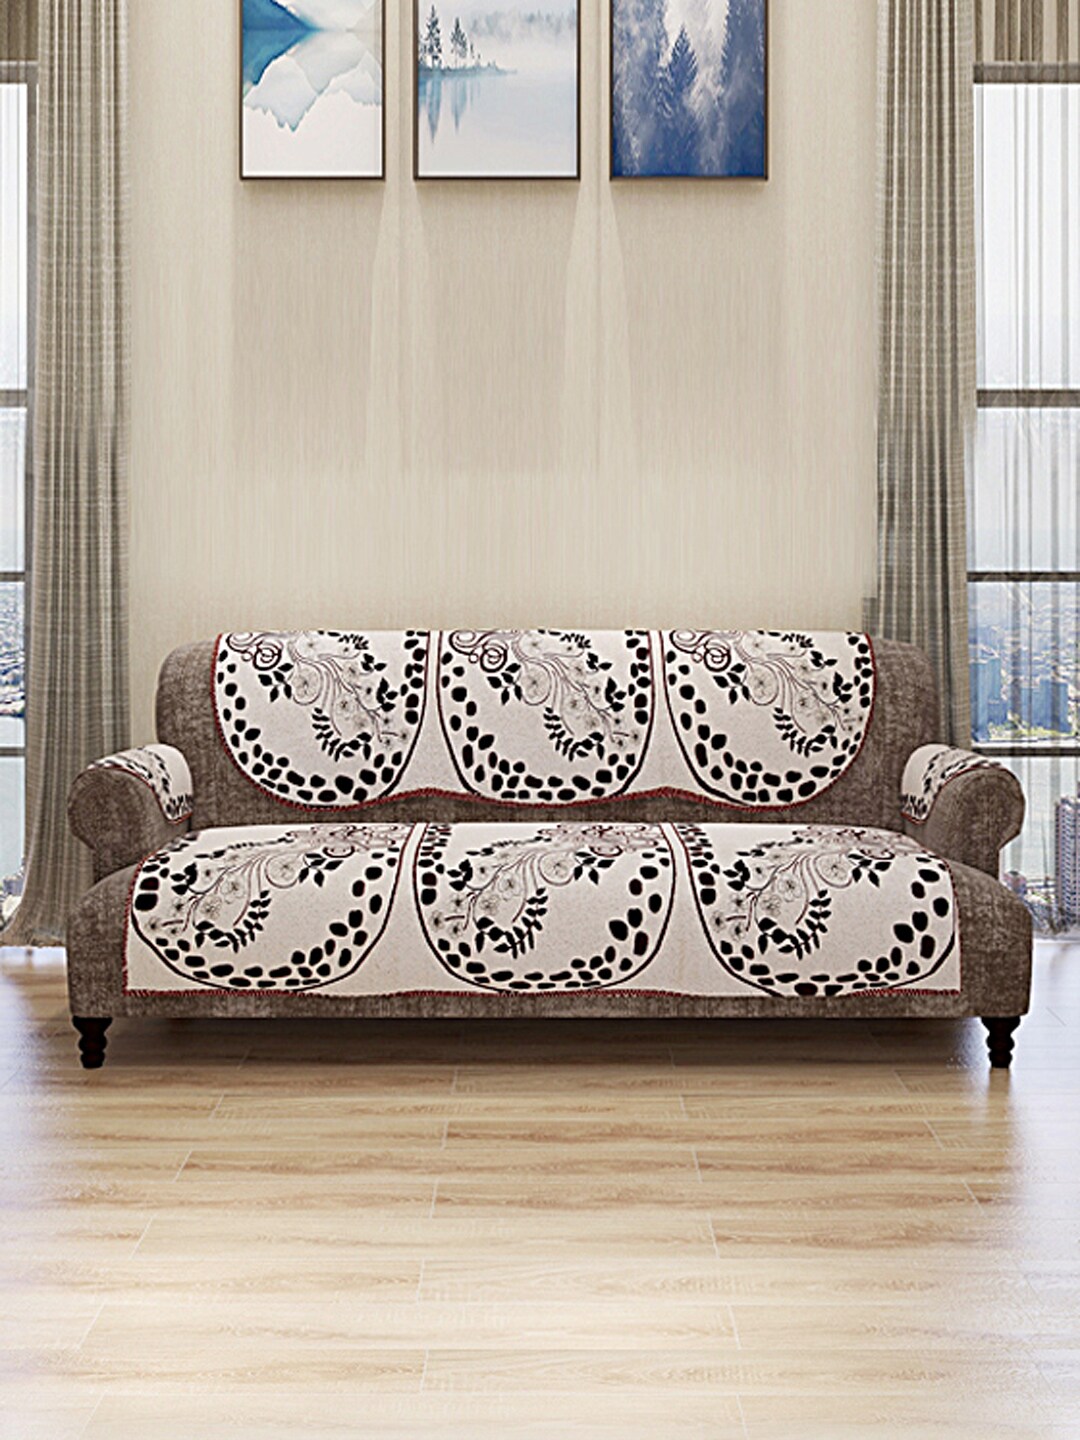 ROMEE Set Of 12 Cream-Colored & Black Self Design 5-Seater Sofa Cover With 6 Arm Covers Price in India